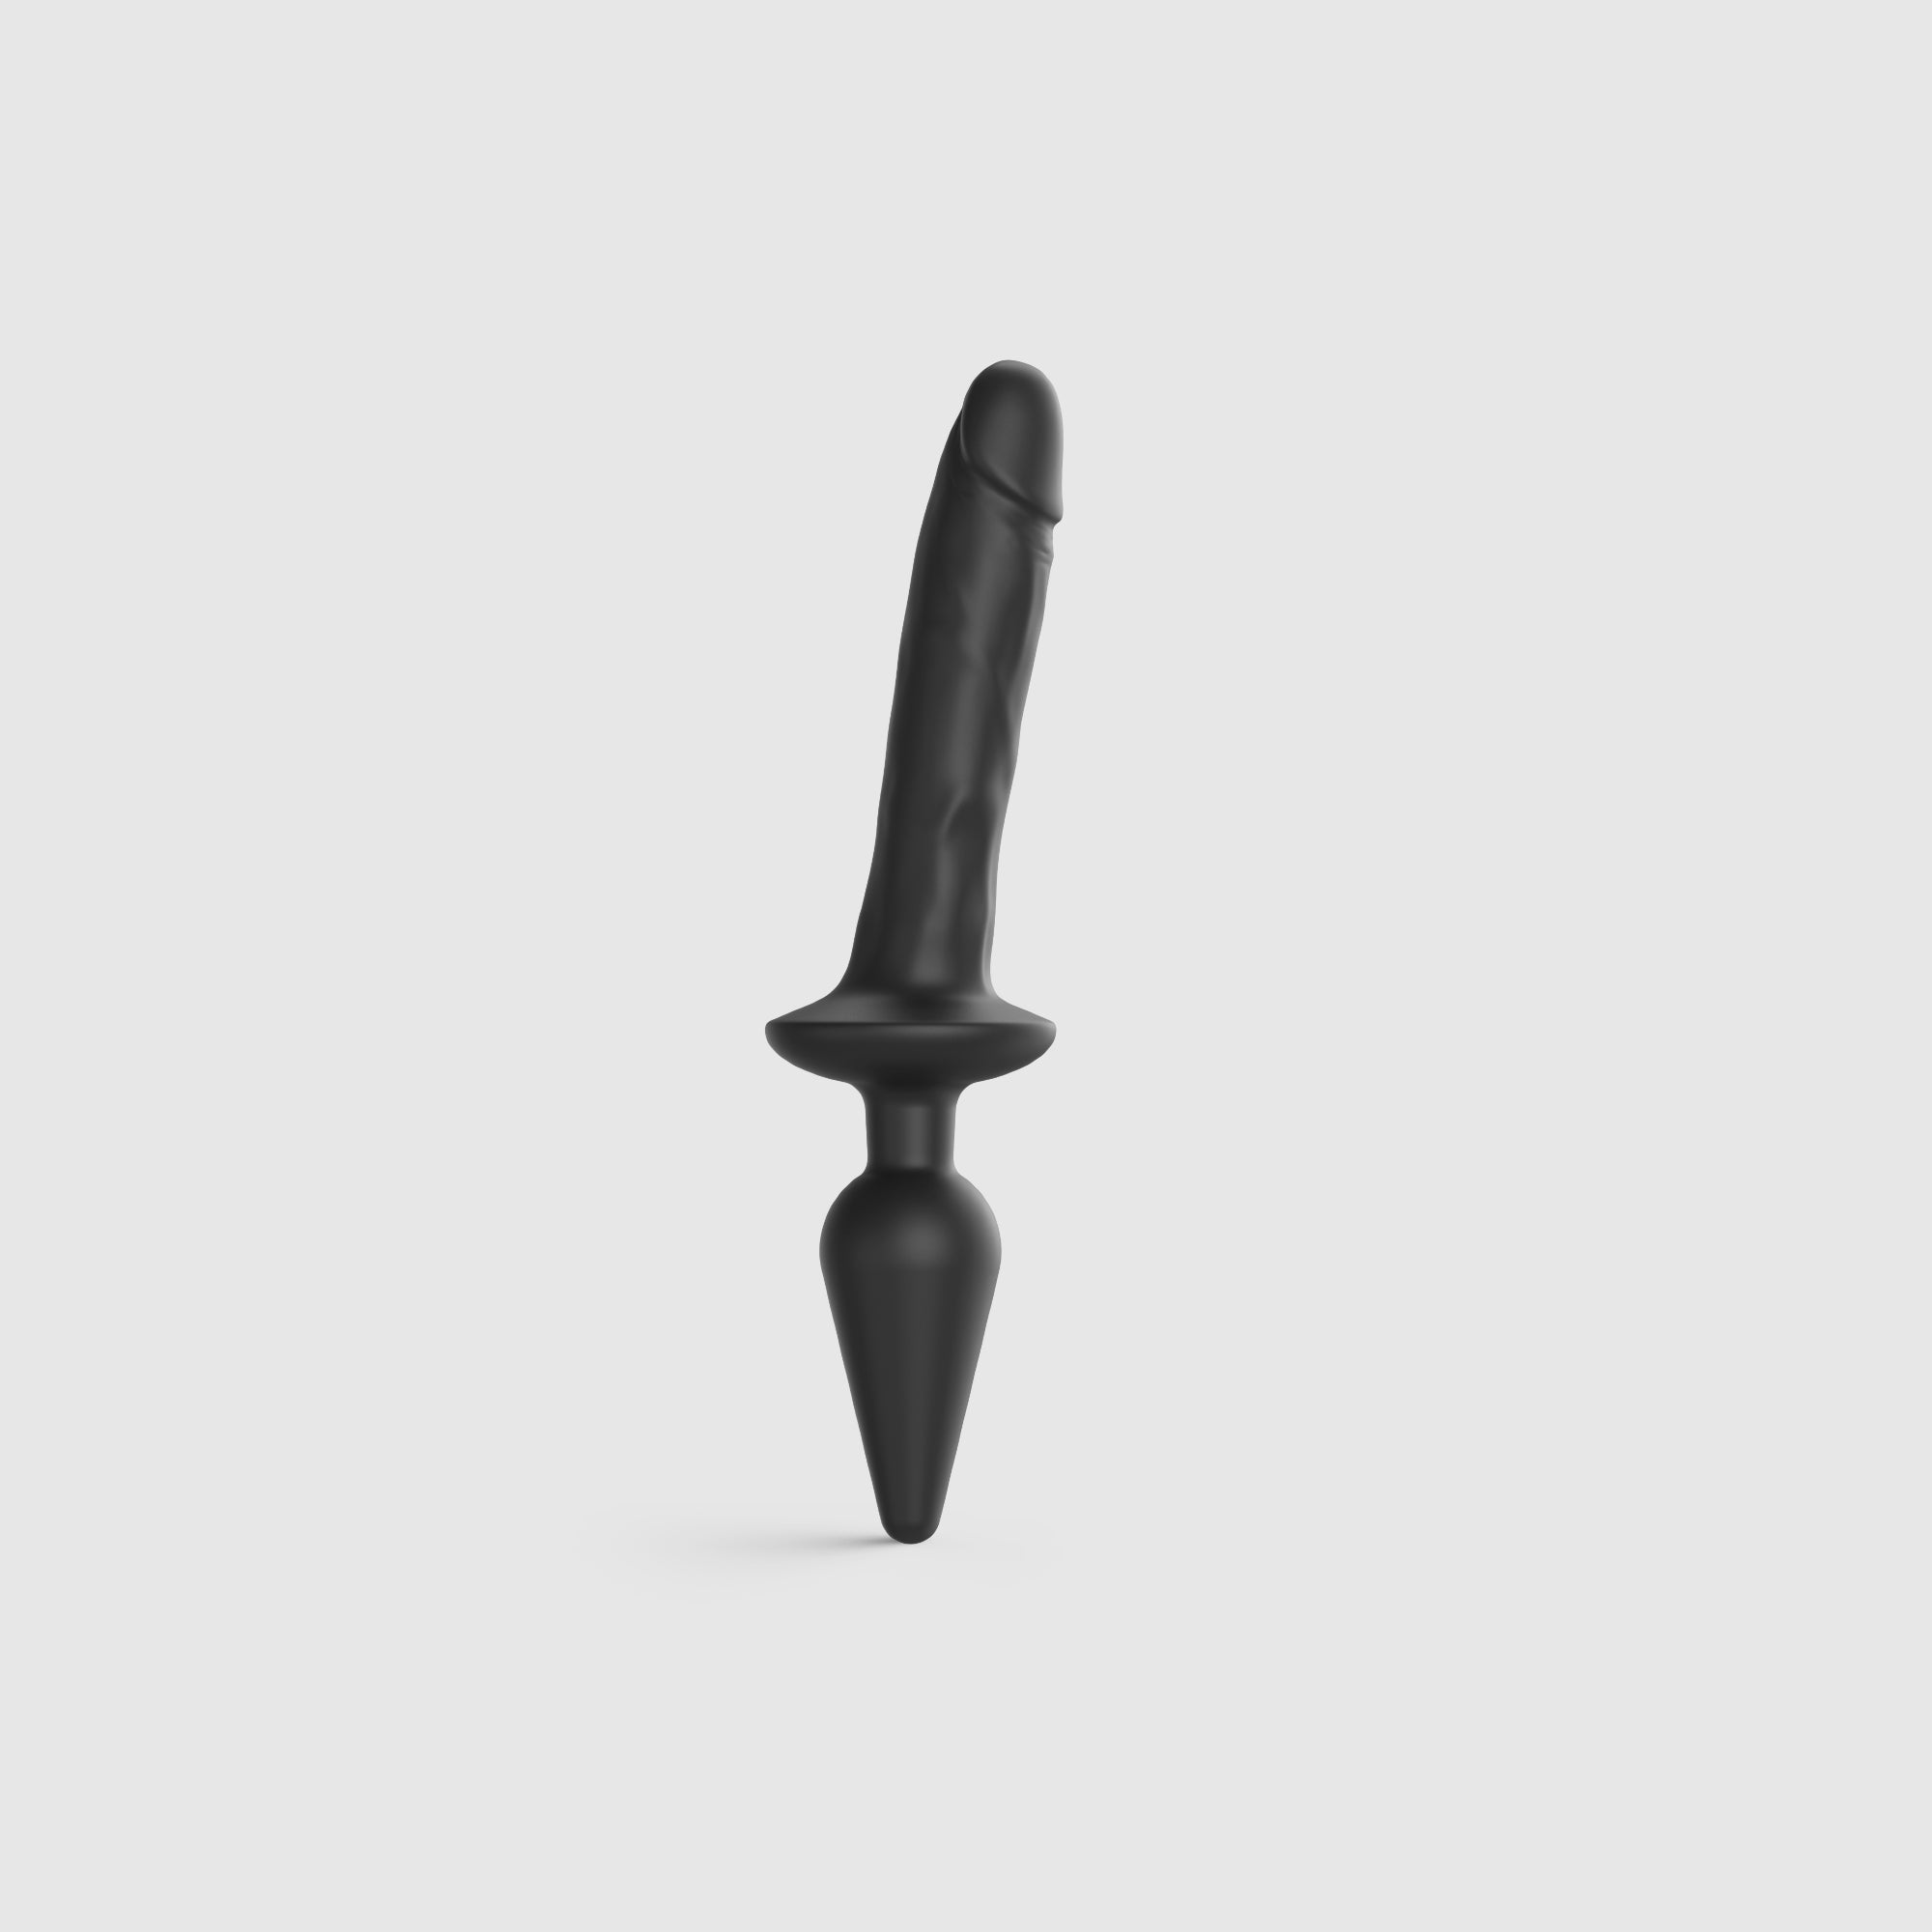 switch-plug-in-realistic-dildo-noirstrap-on-me